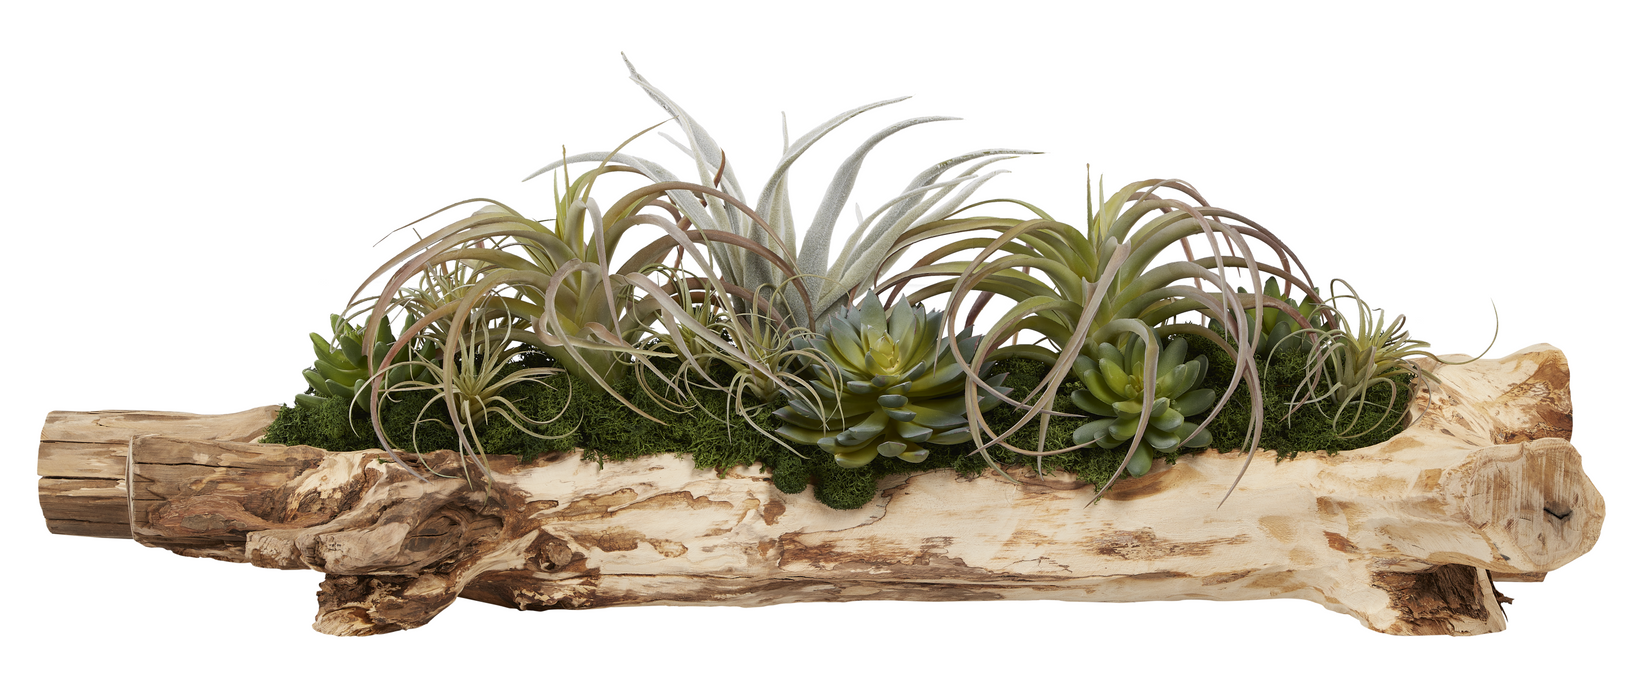 36" Driftwood with Mixed Airplants and Succulents AR1025